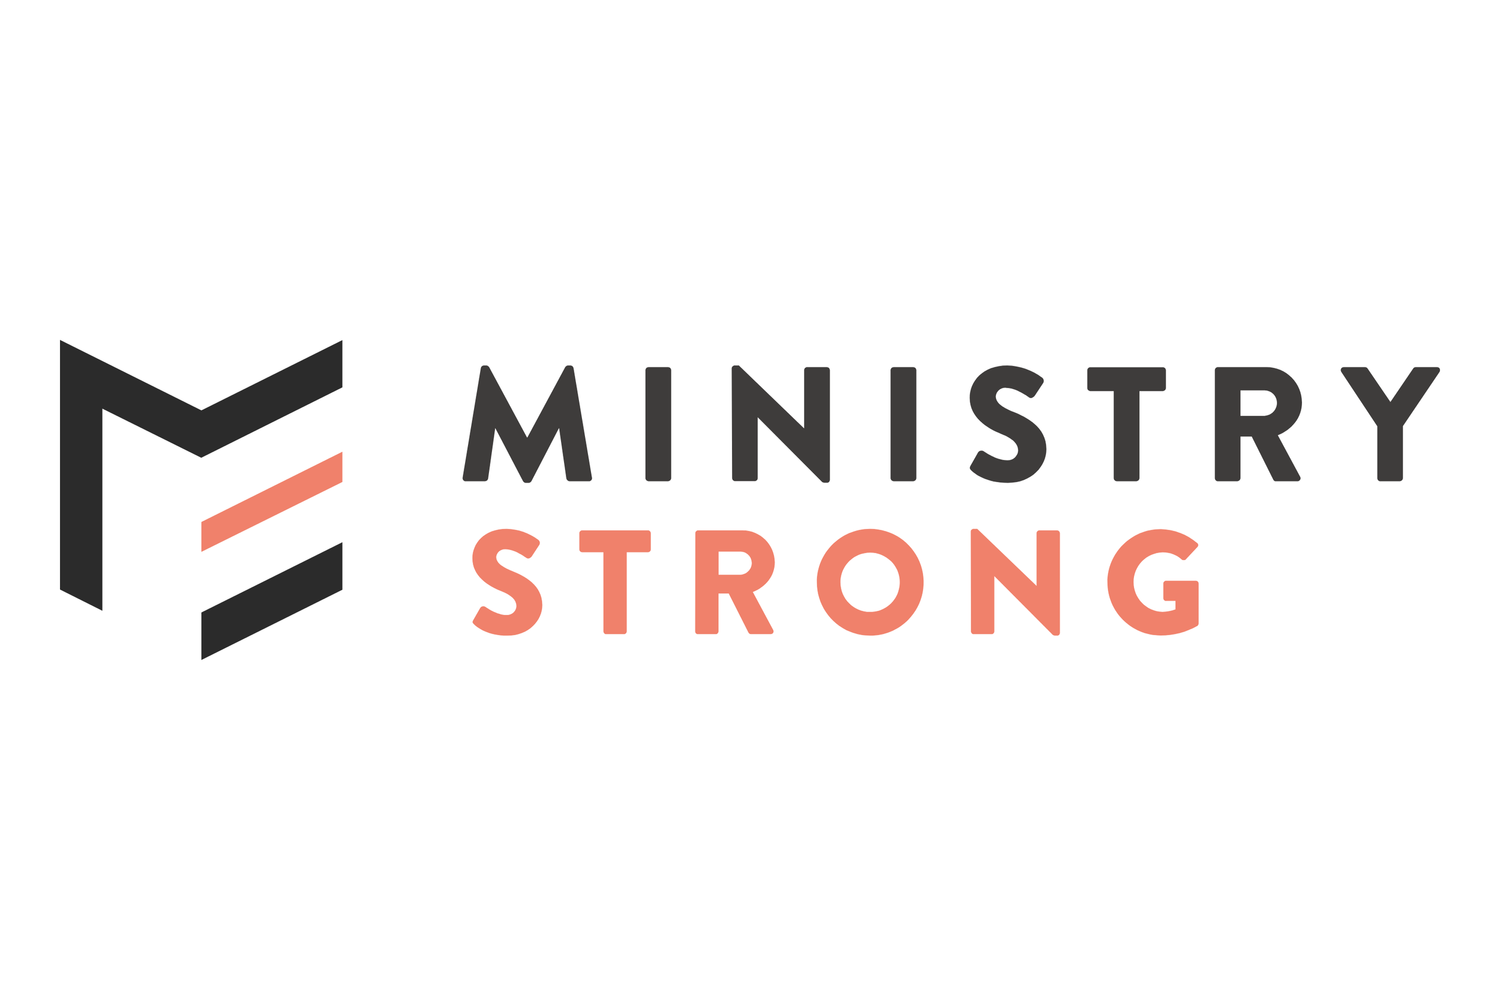  Ministry Strong